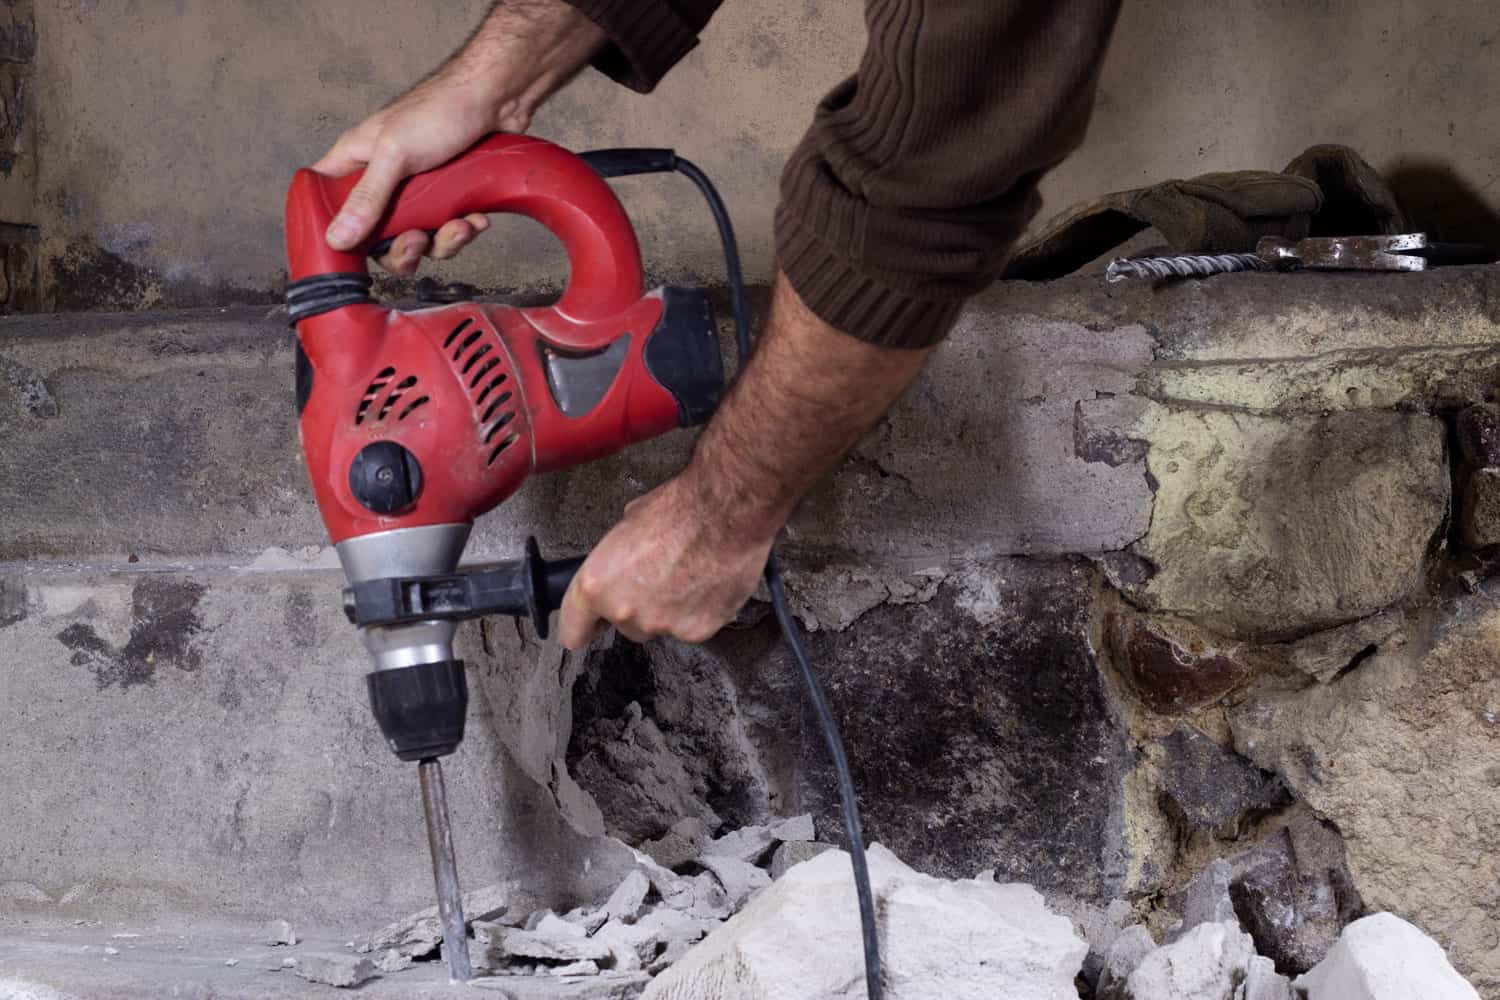 Worker using a hammer drill in a house renovation project